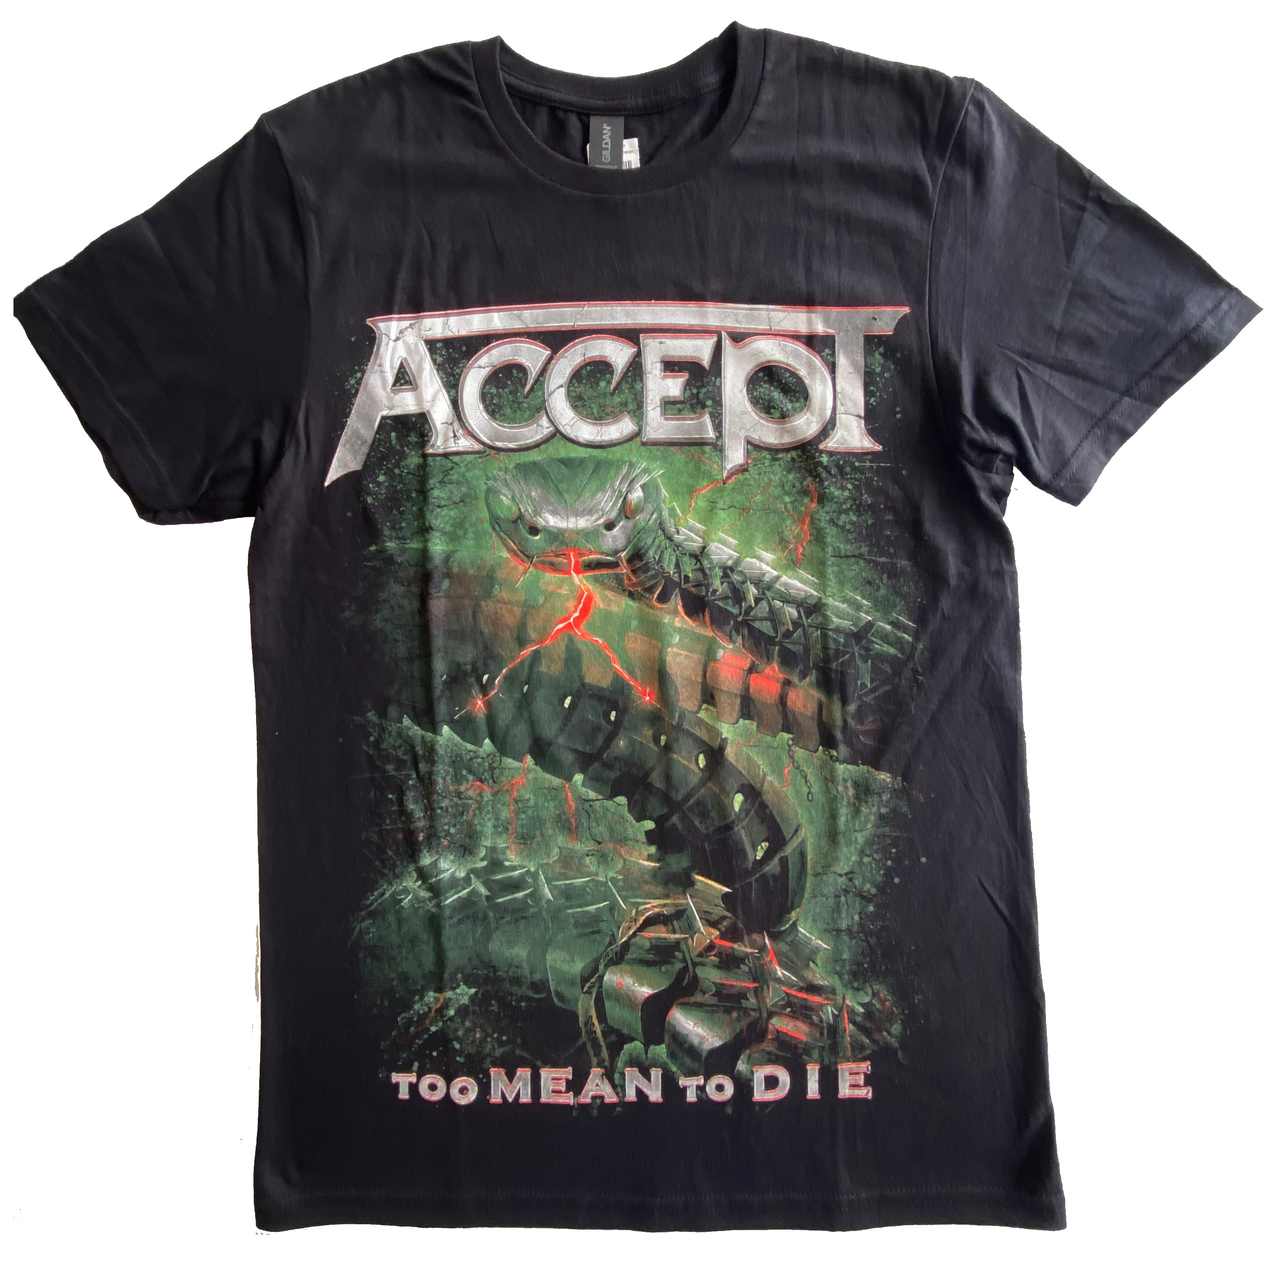 Accept Too Mean to Die T-Shirt